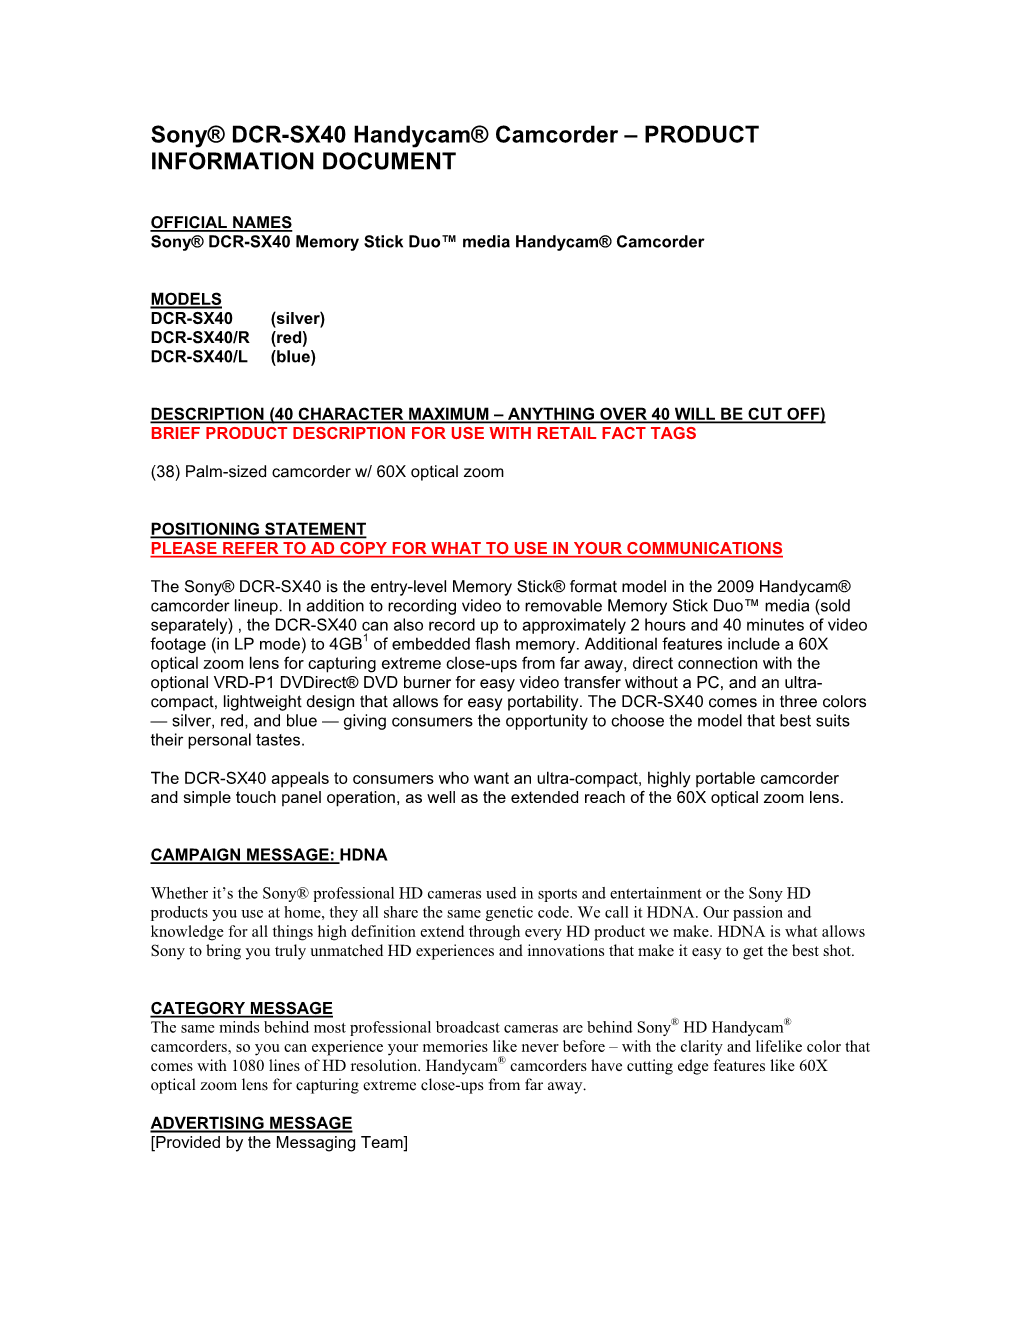 Sony® DCR-SX40 Handycam® Camcorder – PRODUCT INFORMATION DOCUMENT